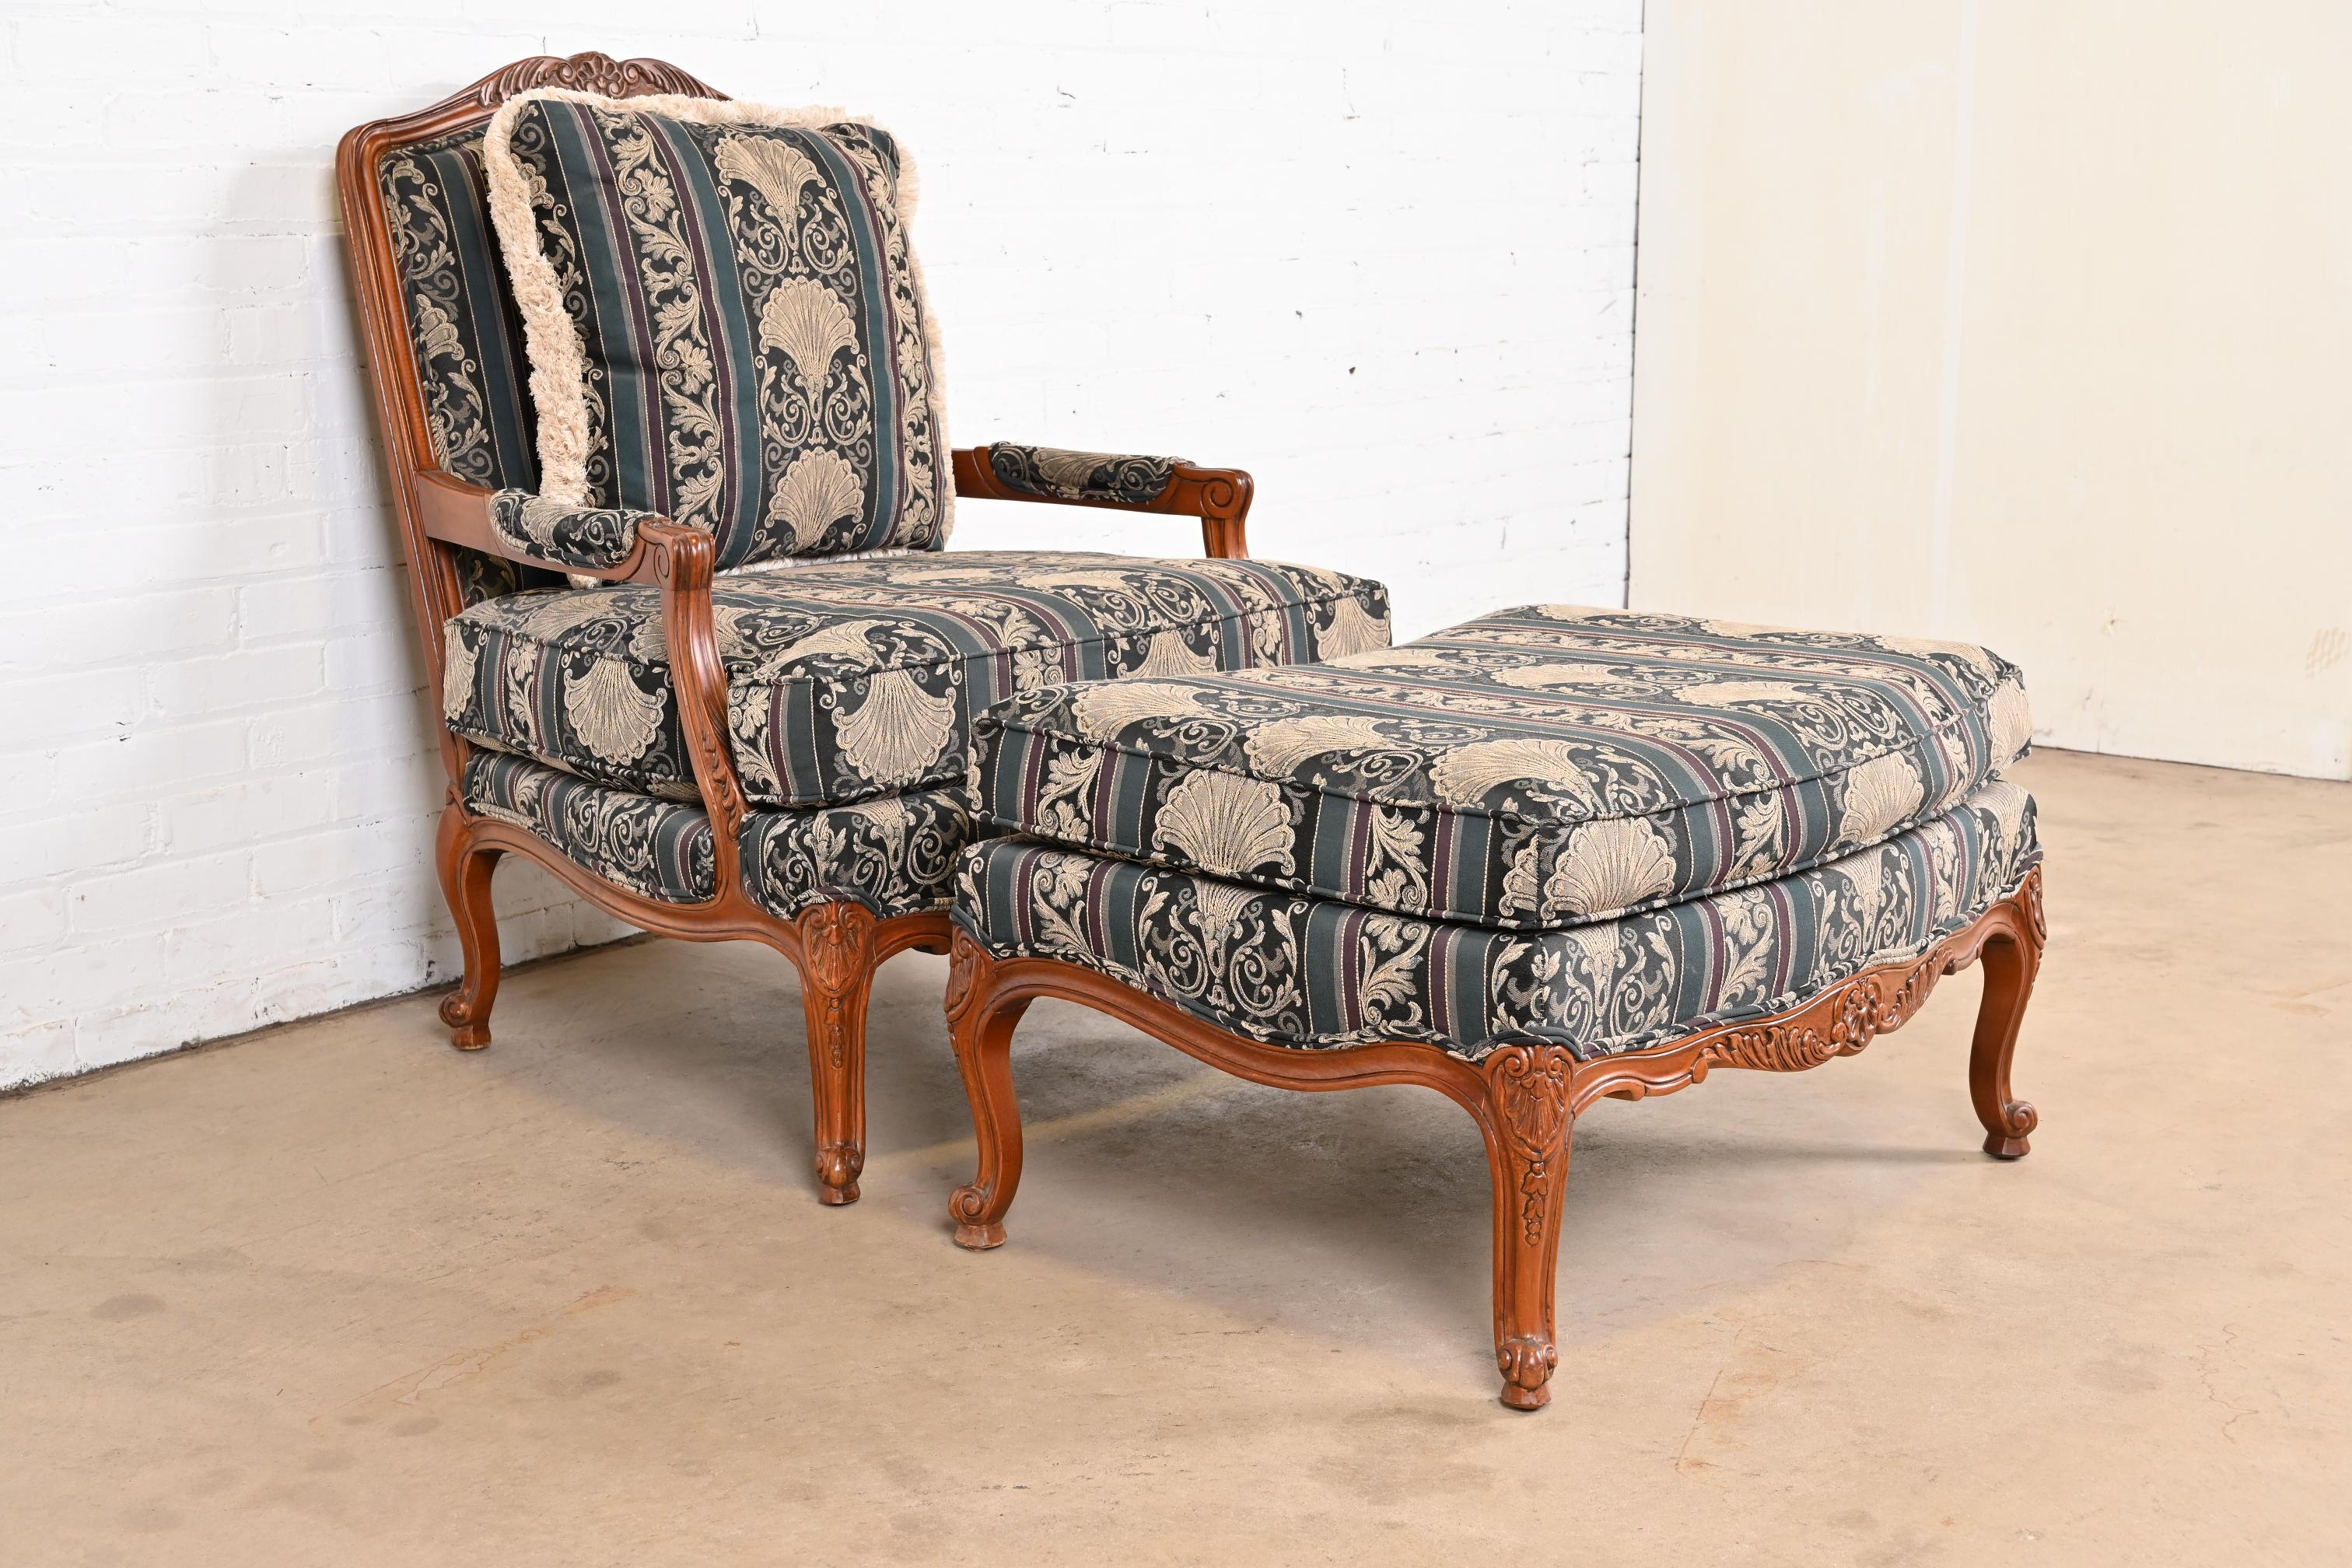 A gorgeous French Provincial Louis XV style upholstered bergere or lounge chair with ottoman

By Thomasville

USA, late 20th century

Walnut frame, with floral patterned upholstery.

Measures:
Chair - 33